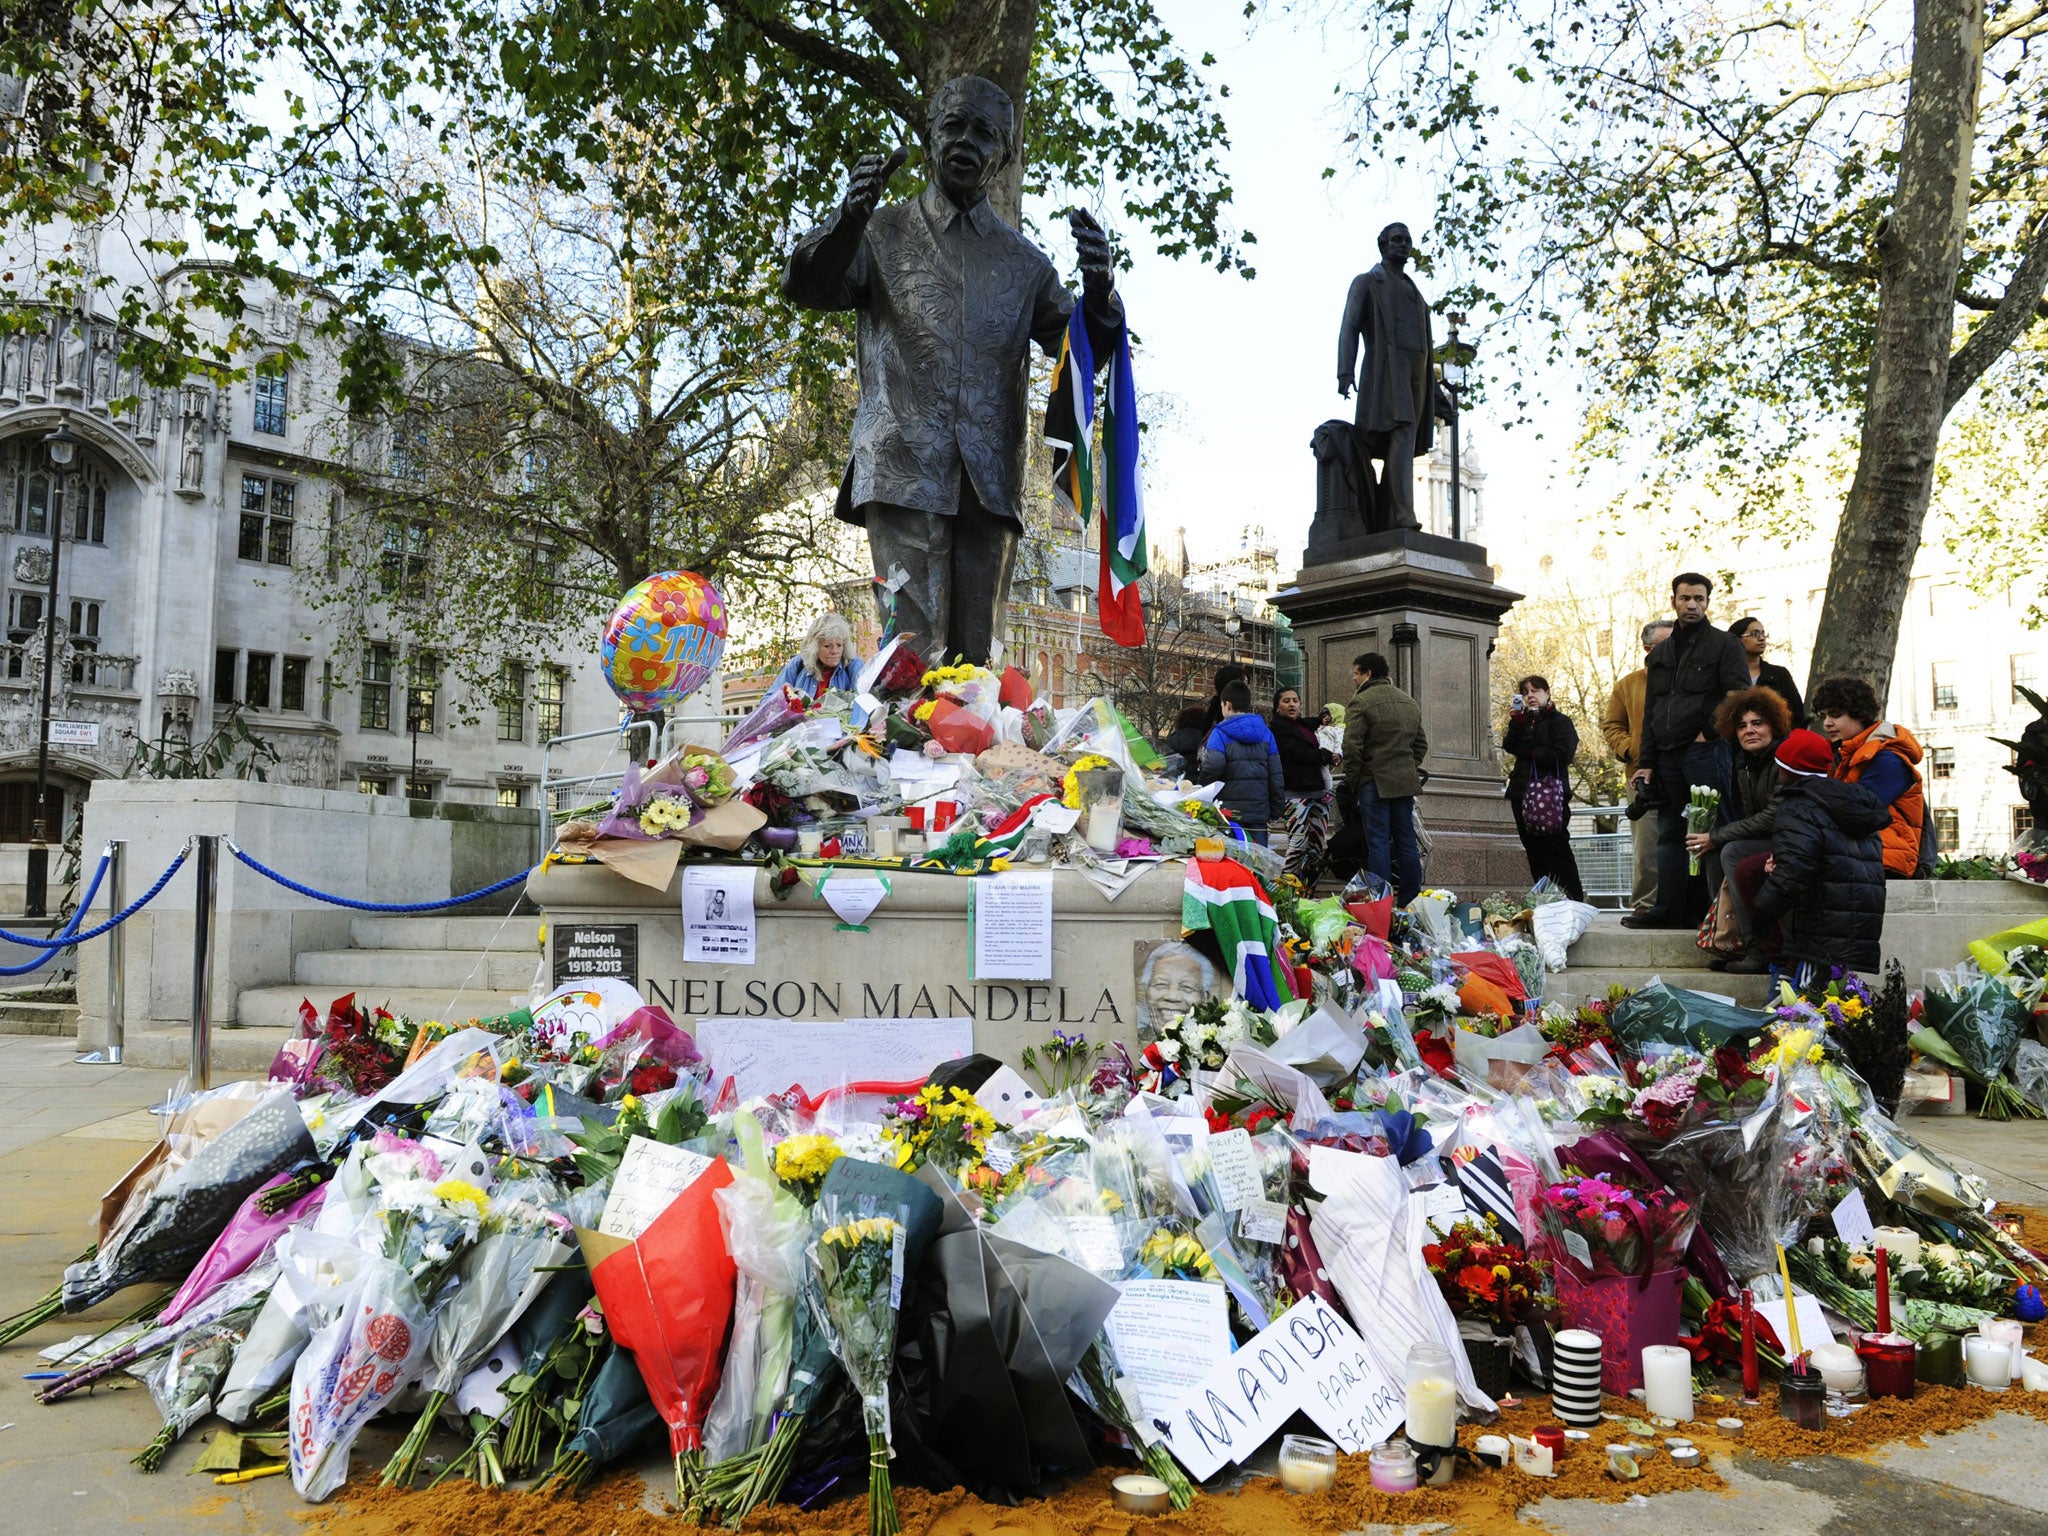 Mandela’s statue in London’s Parliament Square, adorned with flowers, messages and a flag